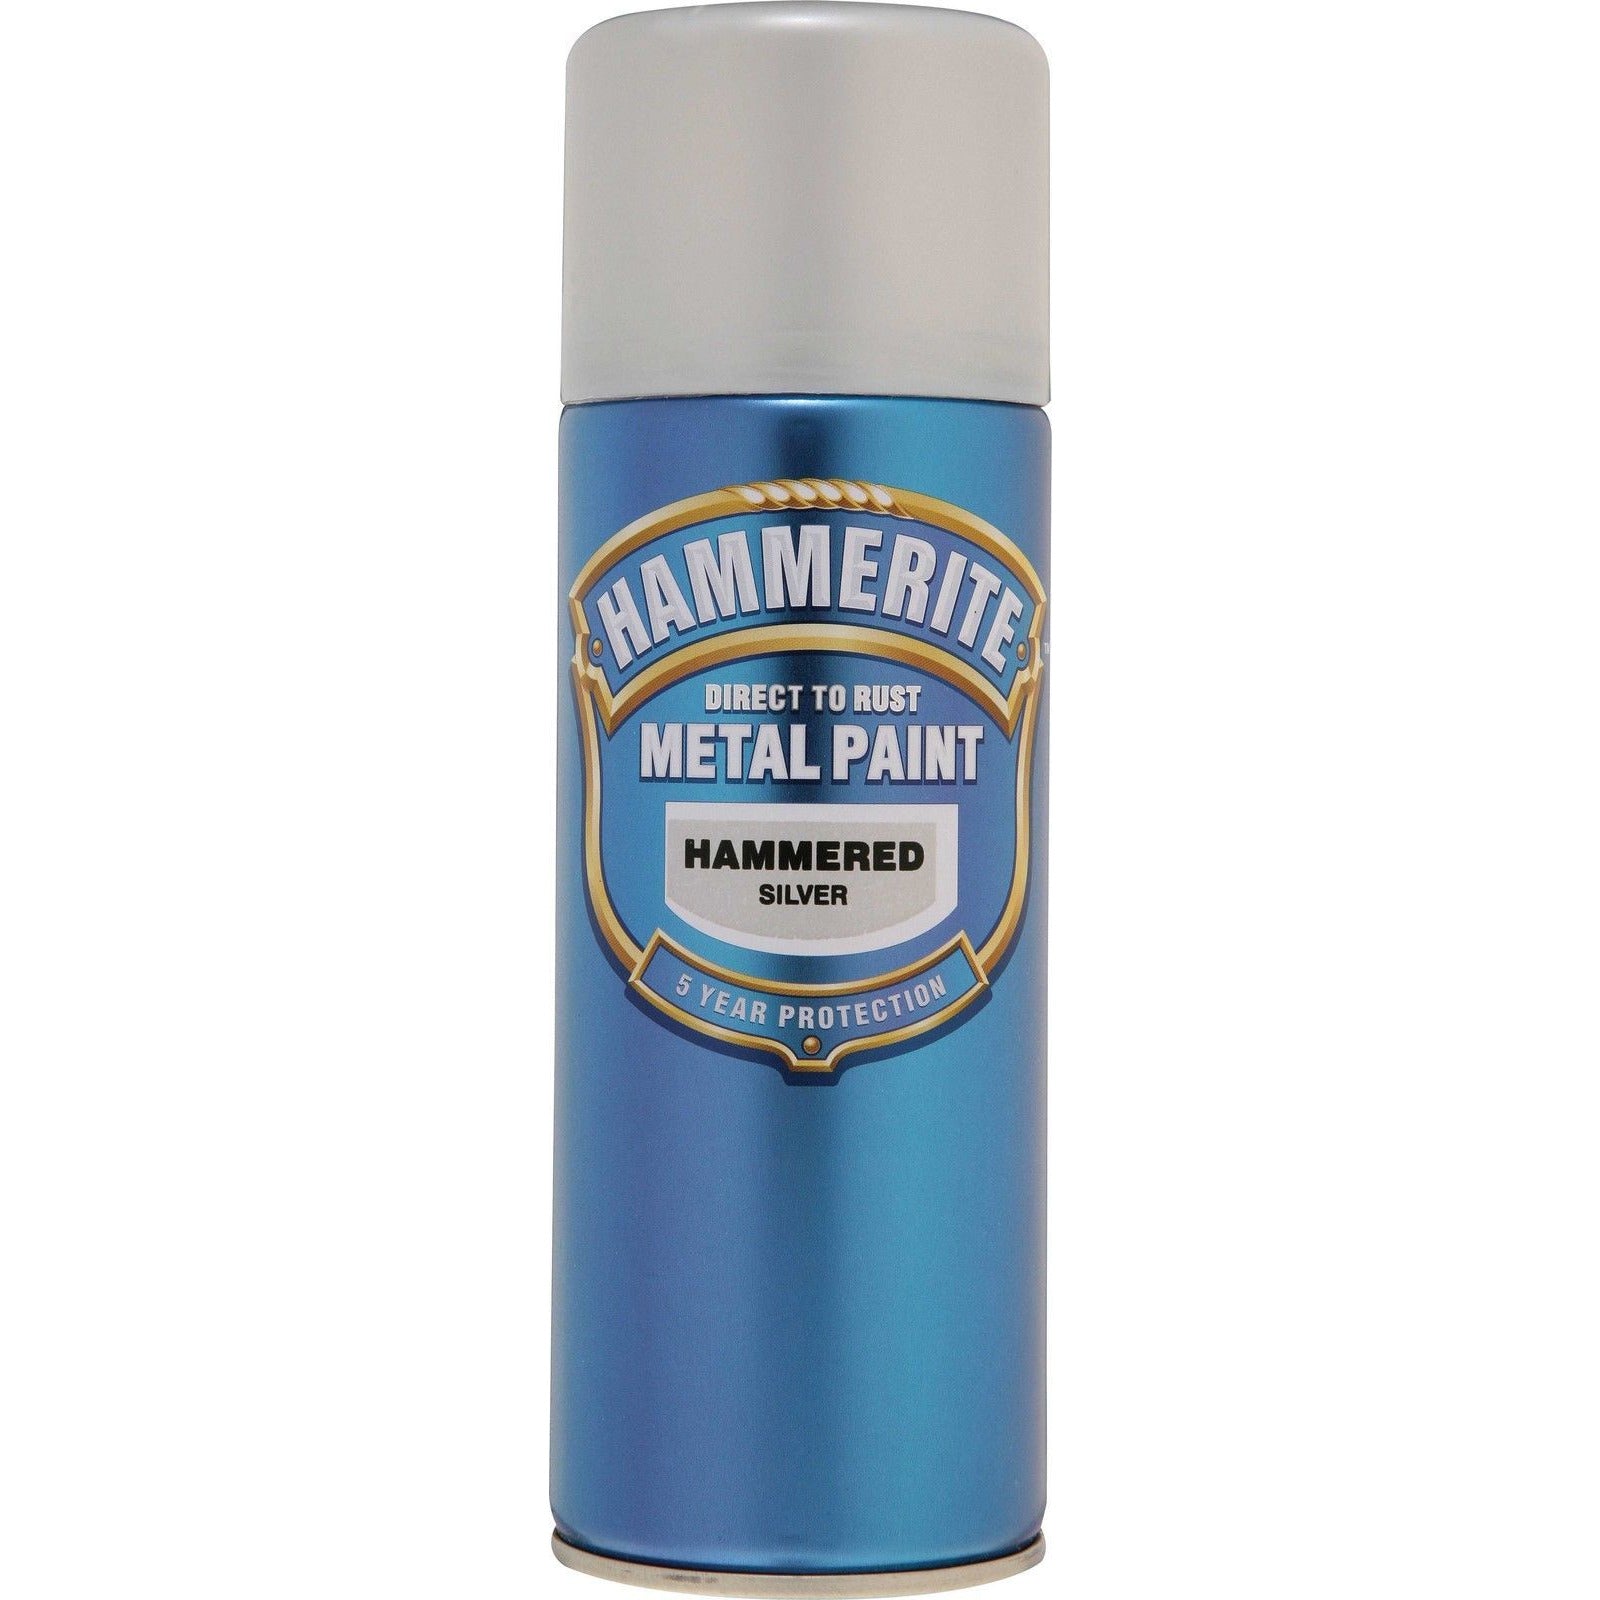 Hammerite Direct to Rust Metal Paint Hammered Silver 400ml Aerosol-Metal Protection & Paint-Tool Factory